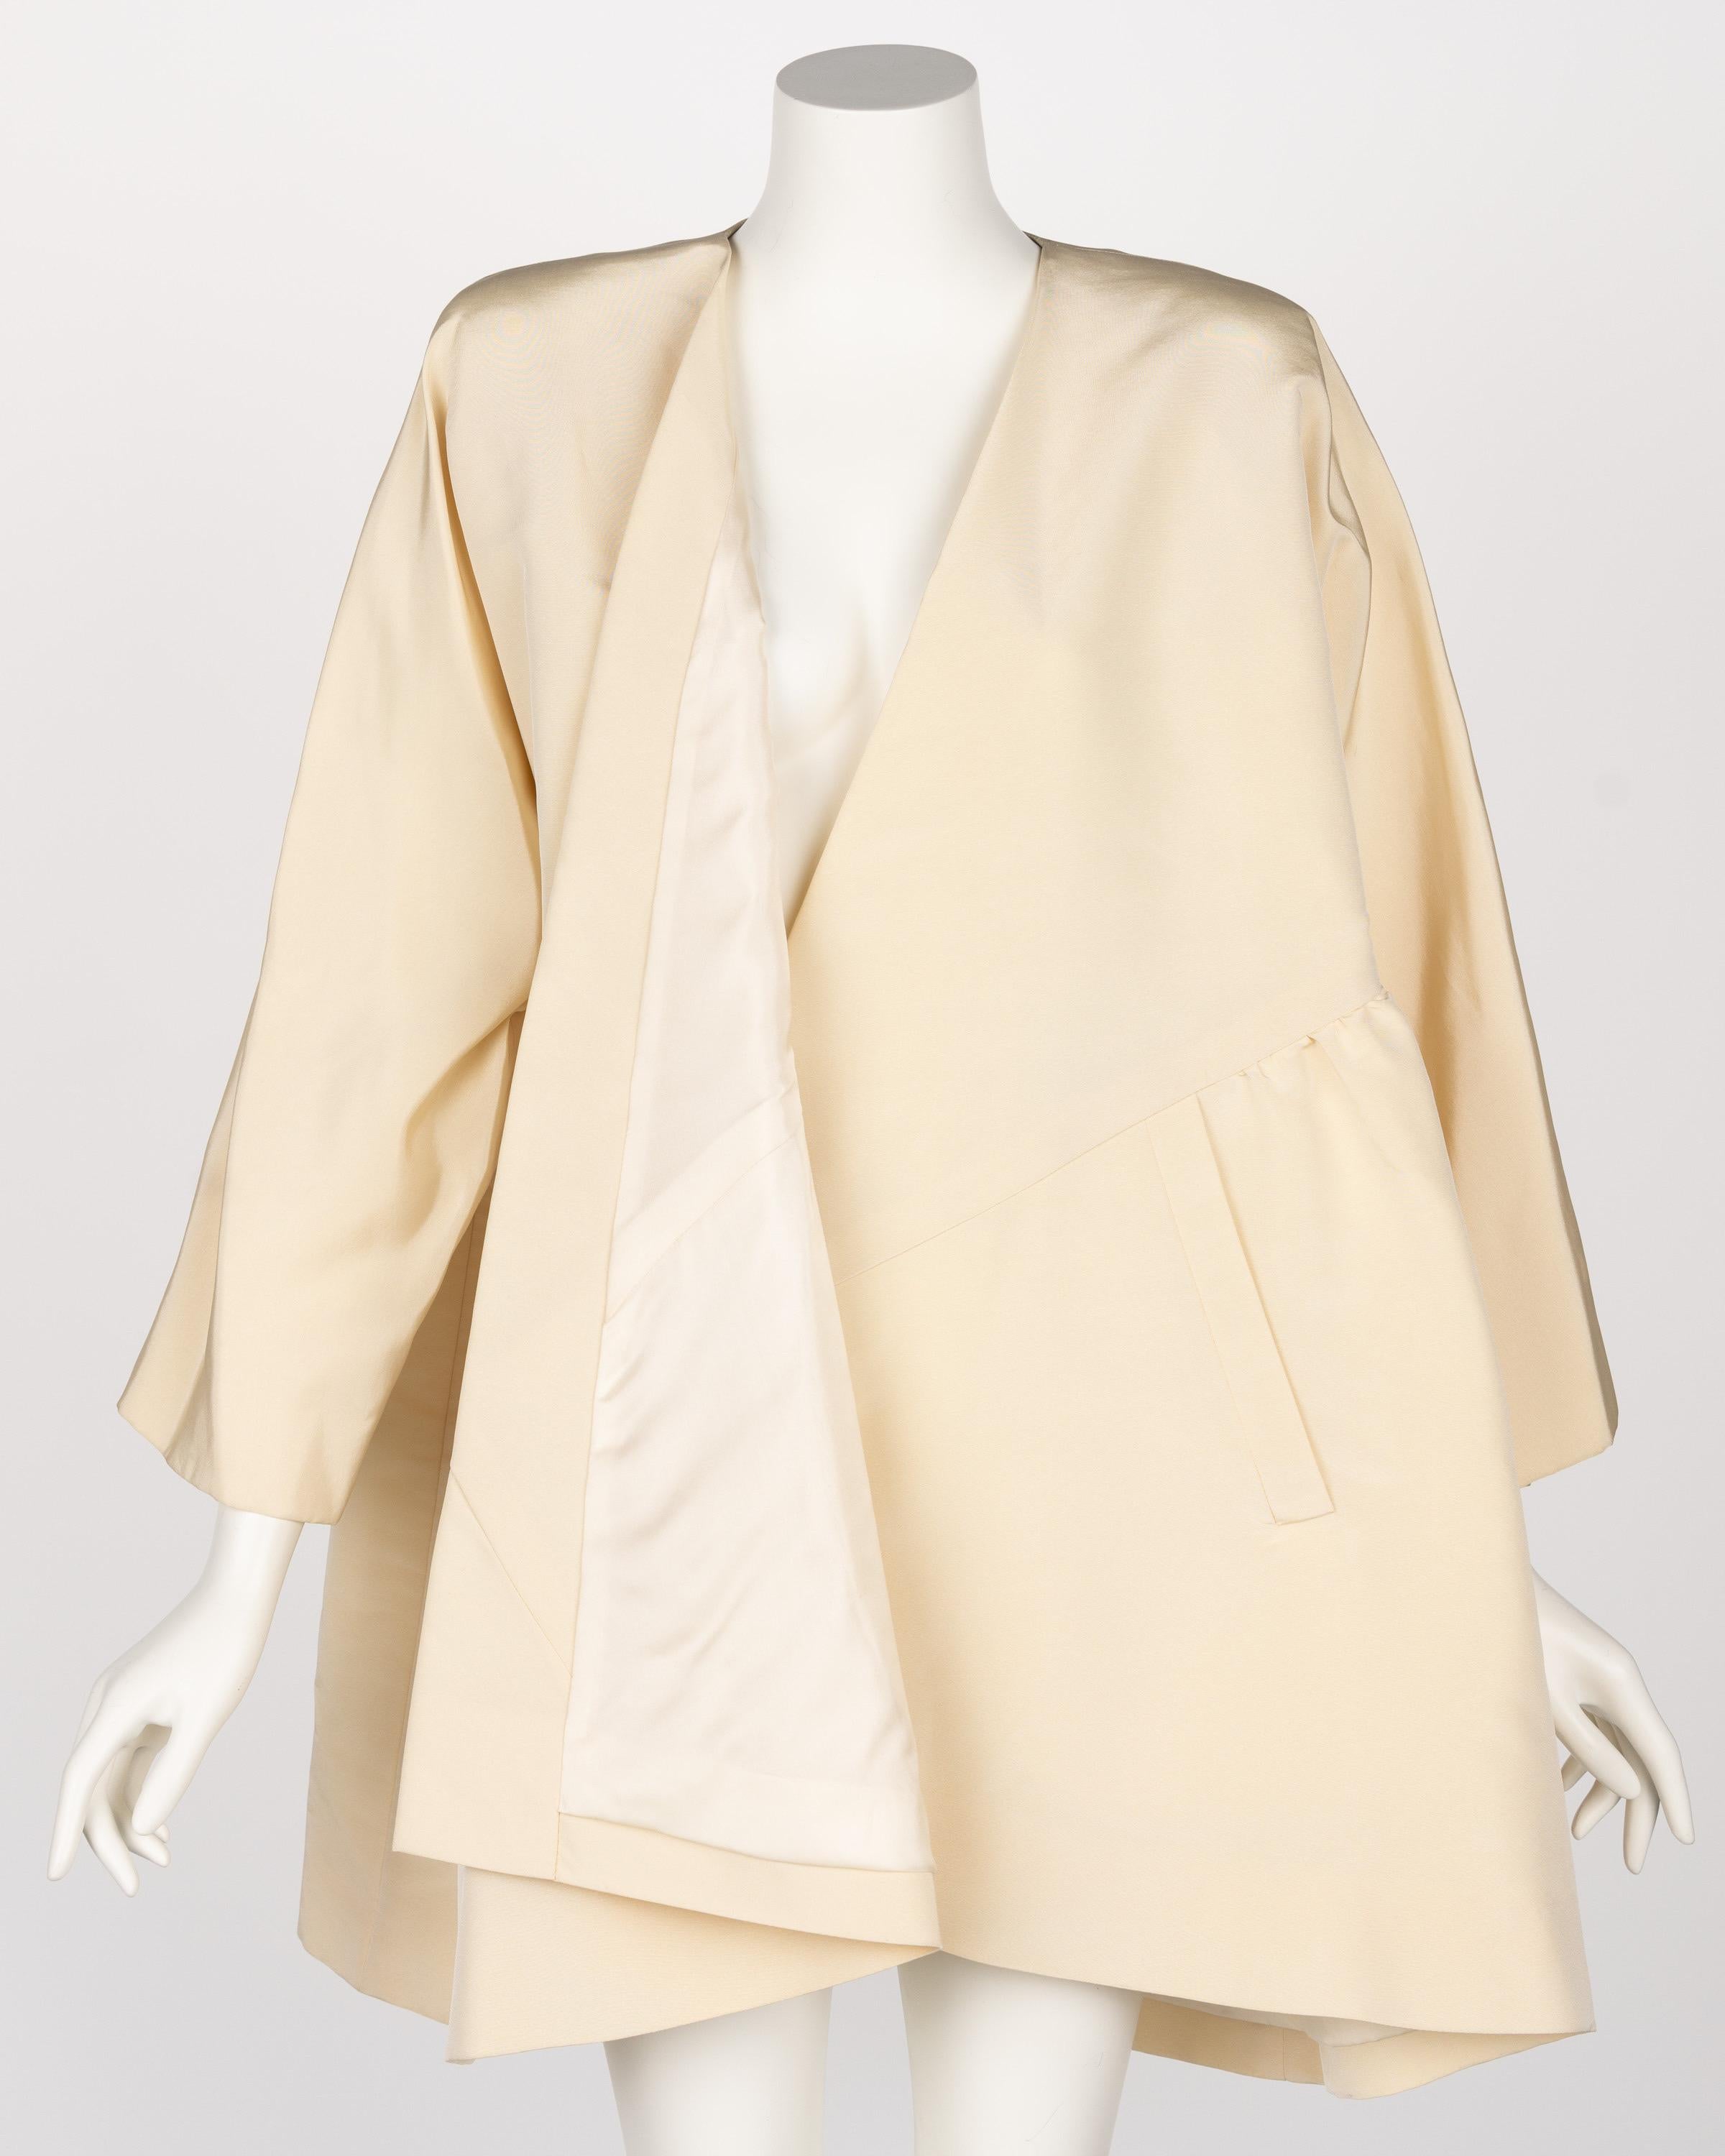 Vintage Givenchy Couture Crème Silk Jacket Coat, 1990s In Good Condition For Sale In Boca Raton, FL